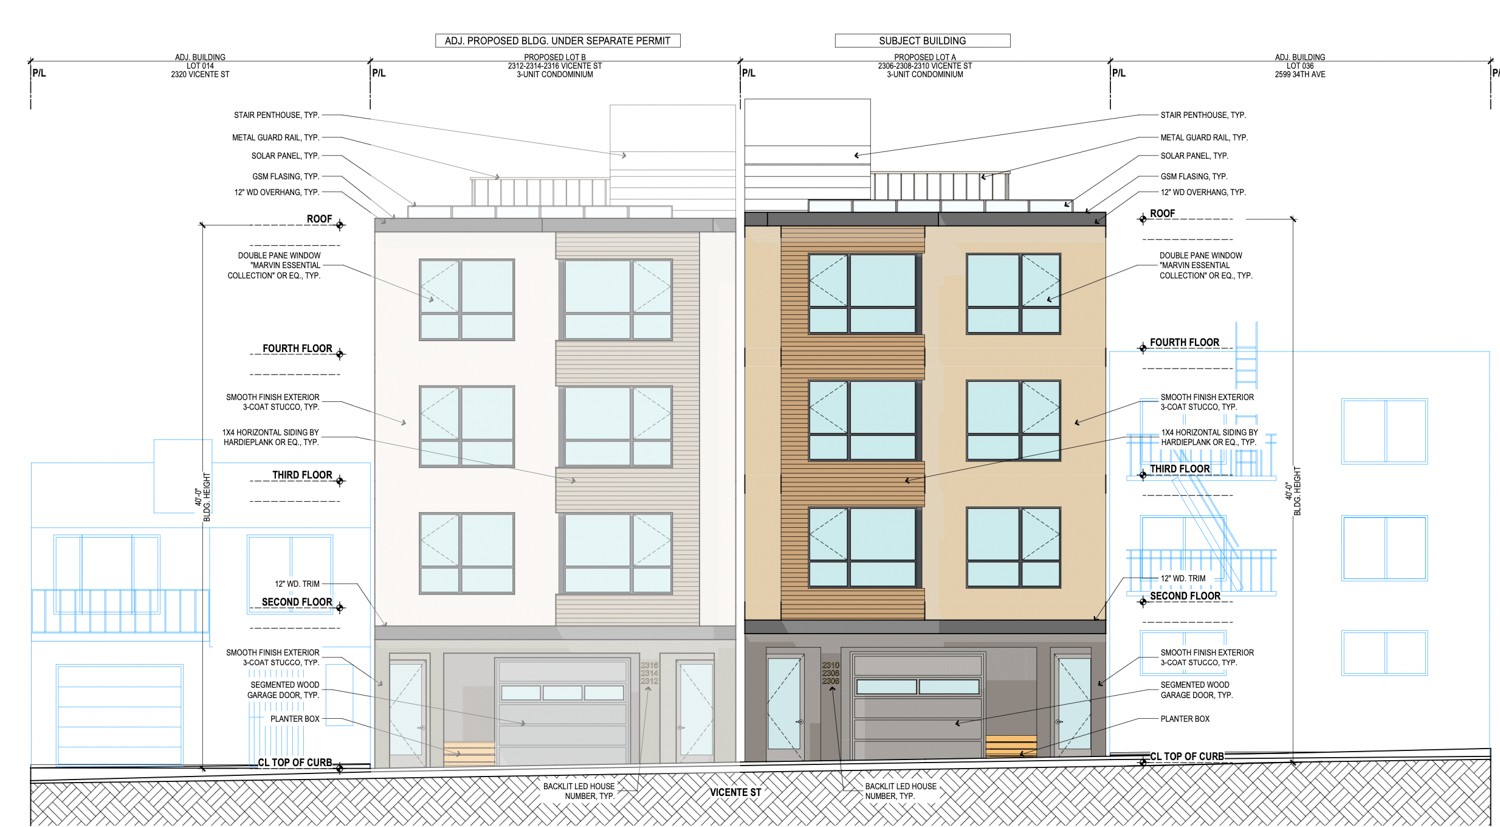 2306-2316 Vicente Street building A and B facade elevations, rendering by Schaub Ly Architects